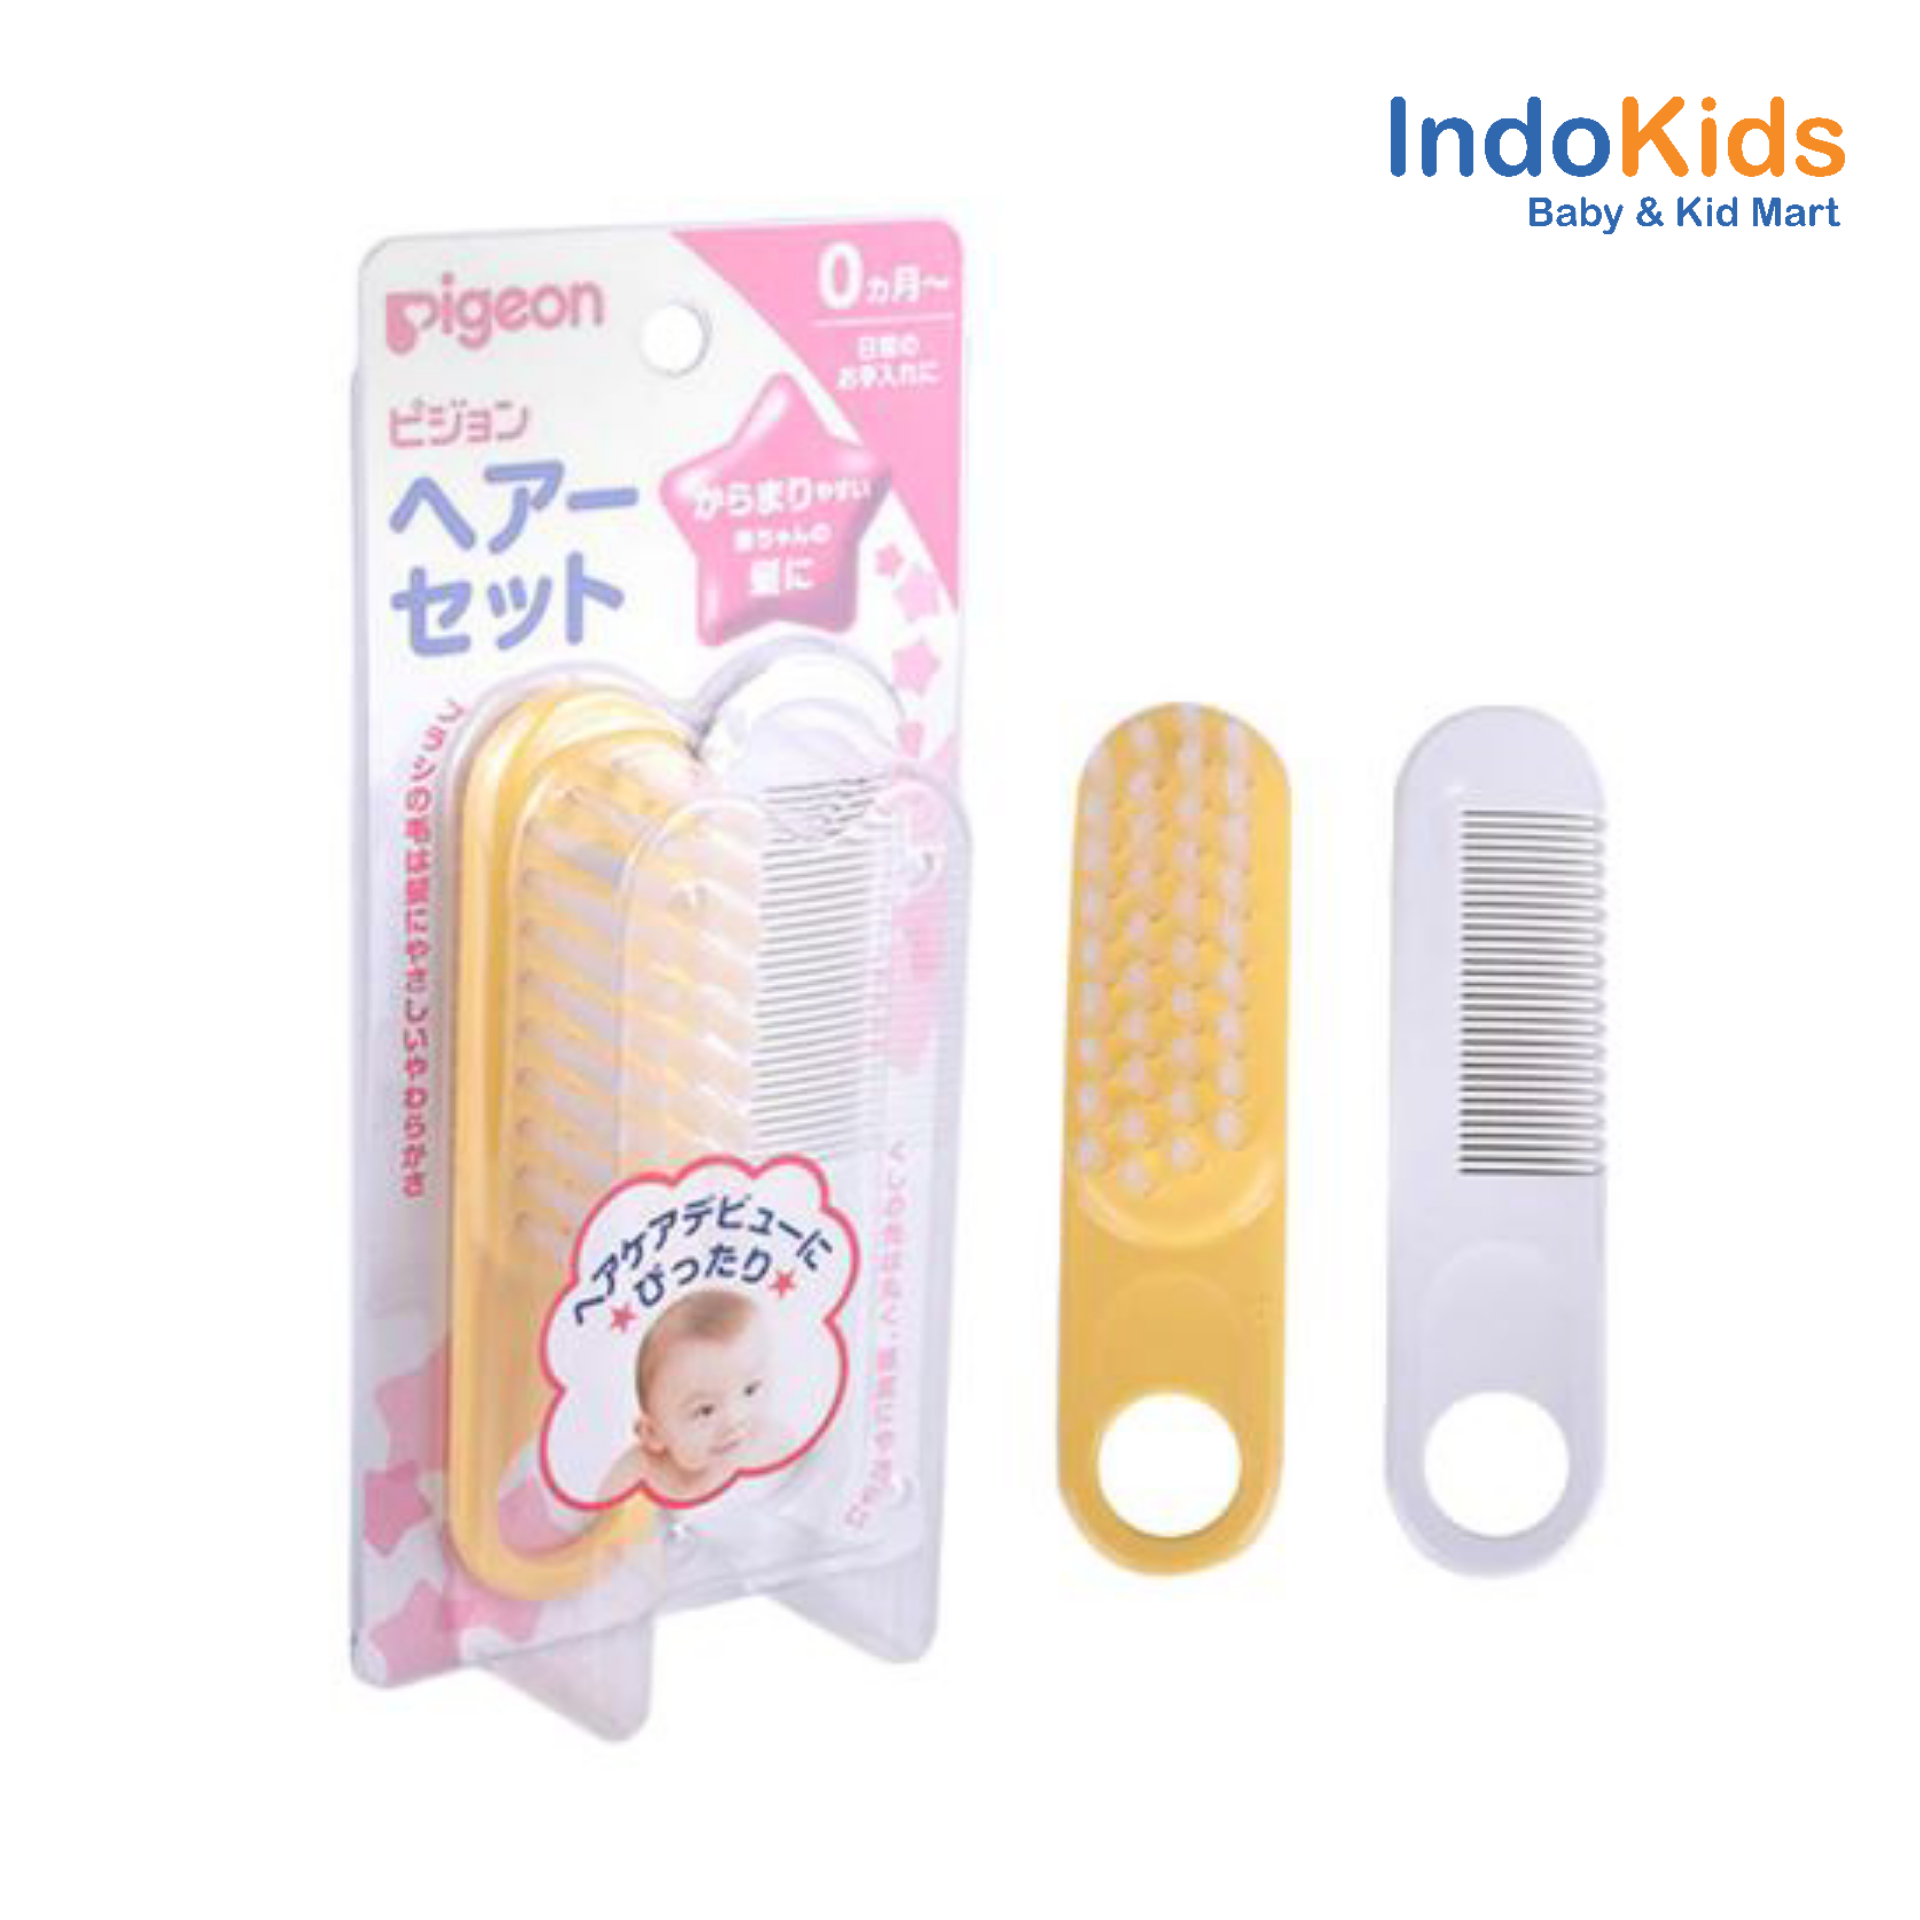 Pigeon Comb And Hair Brush Set 